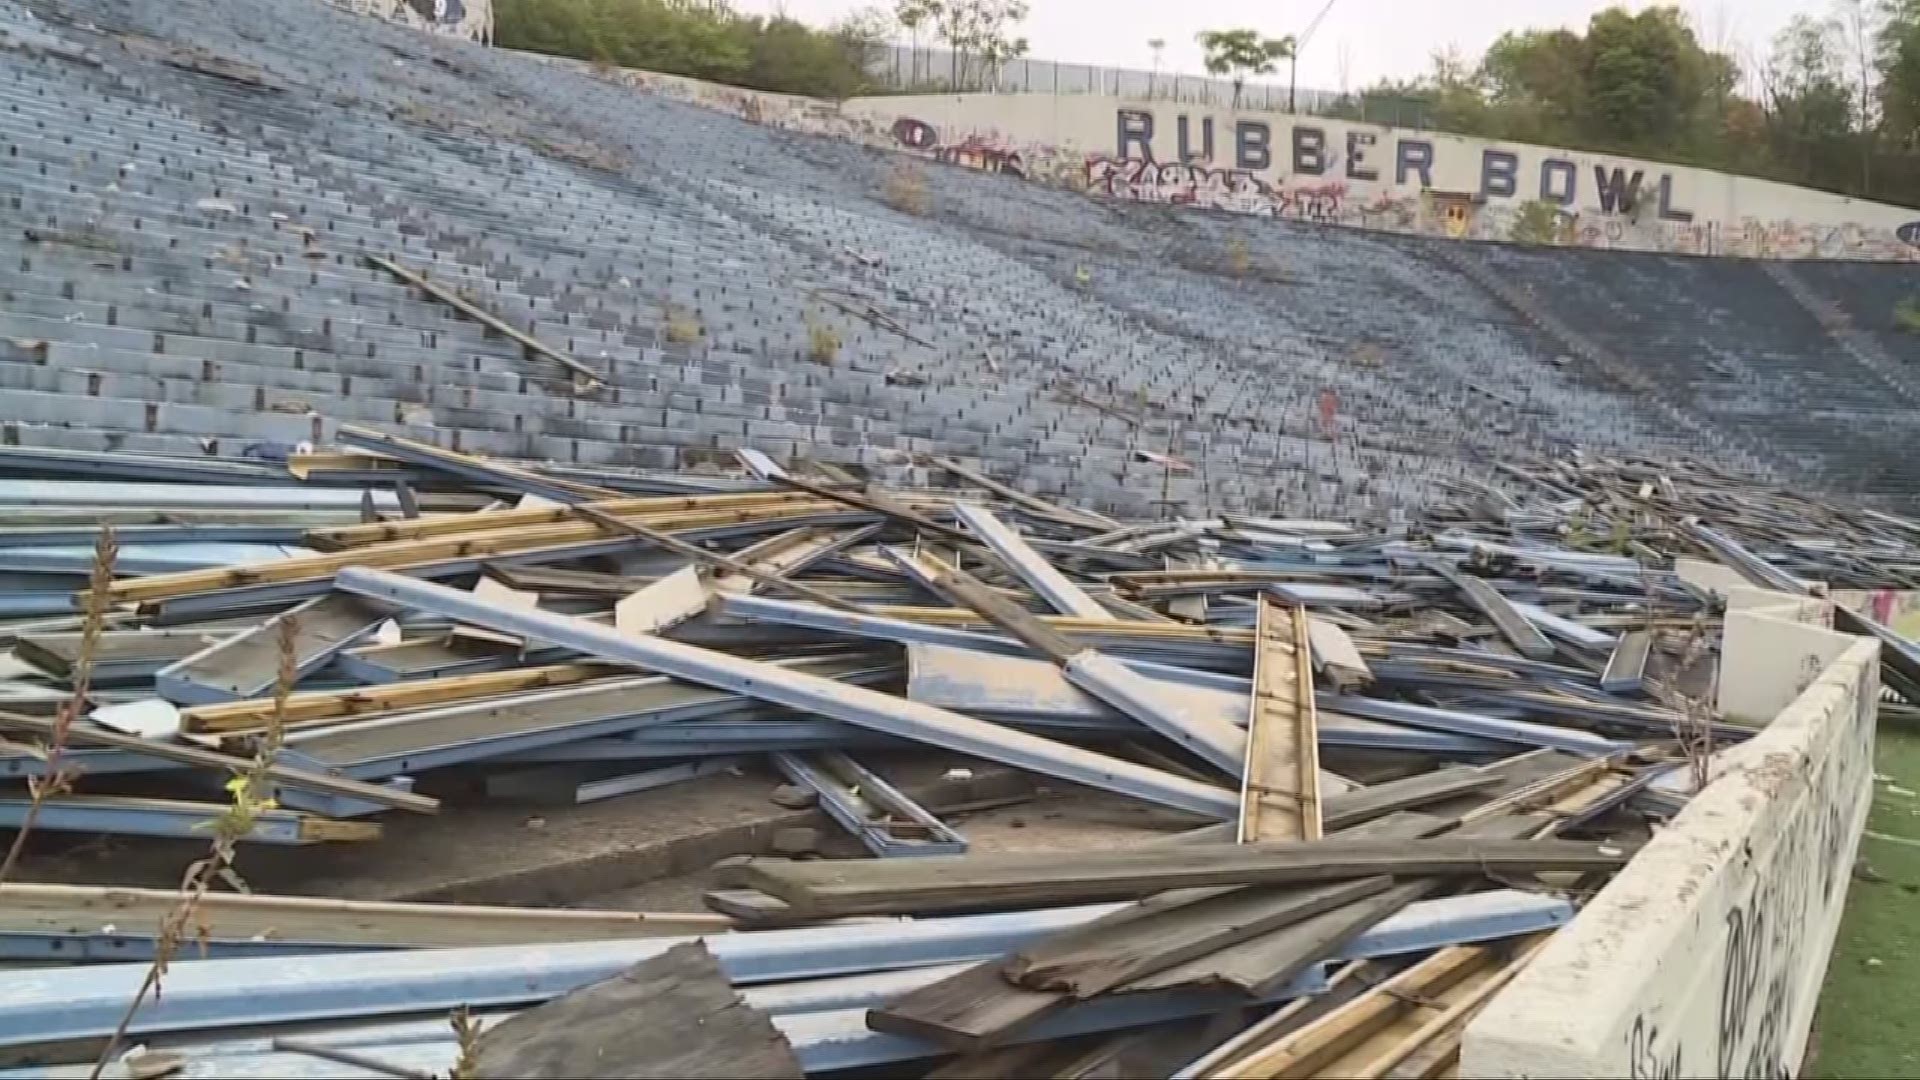 June 20, 2018: An Akron icon is about to disappear. Demolition crews will begin dismantling the Rubber Bowl today.